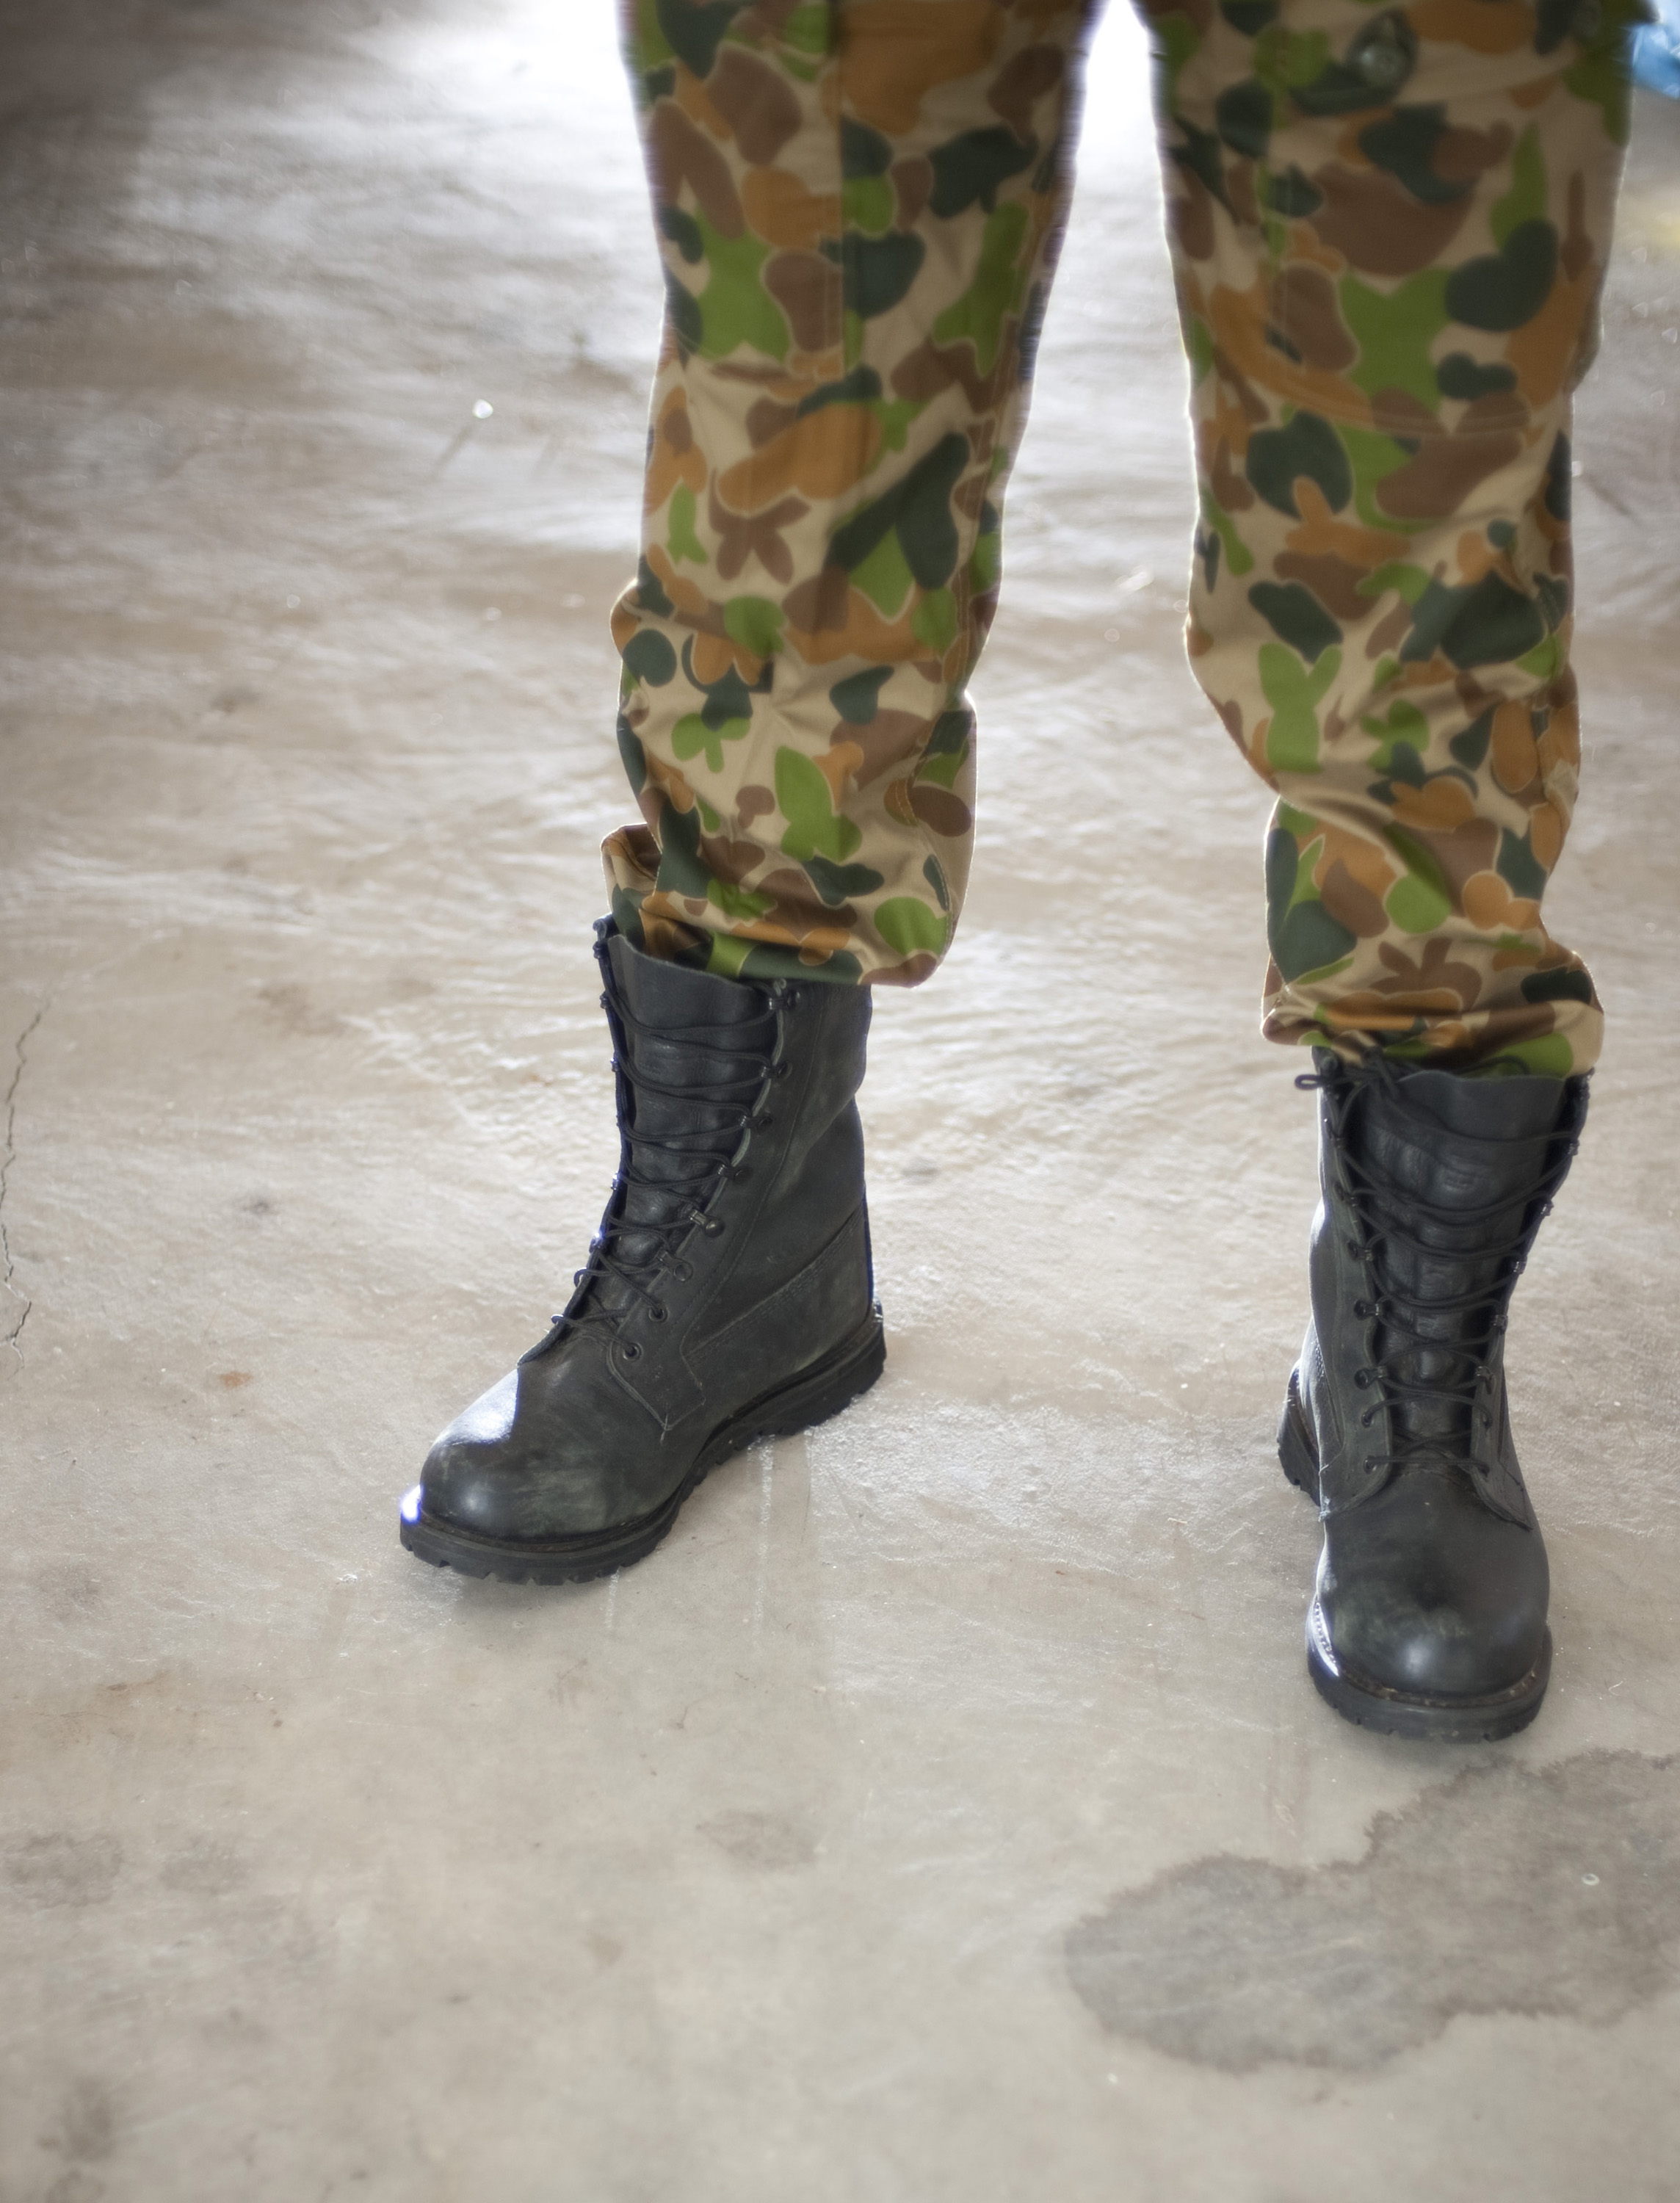 Combat boots and camo-2751 | Stockarch Free Stock Photo Archive